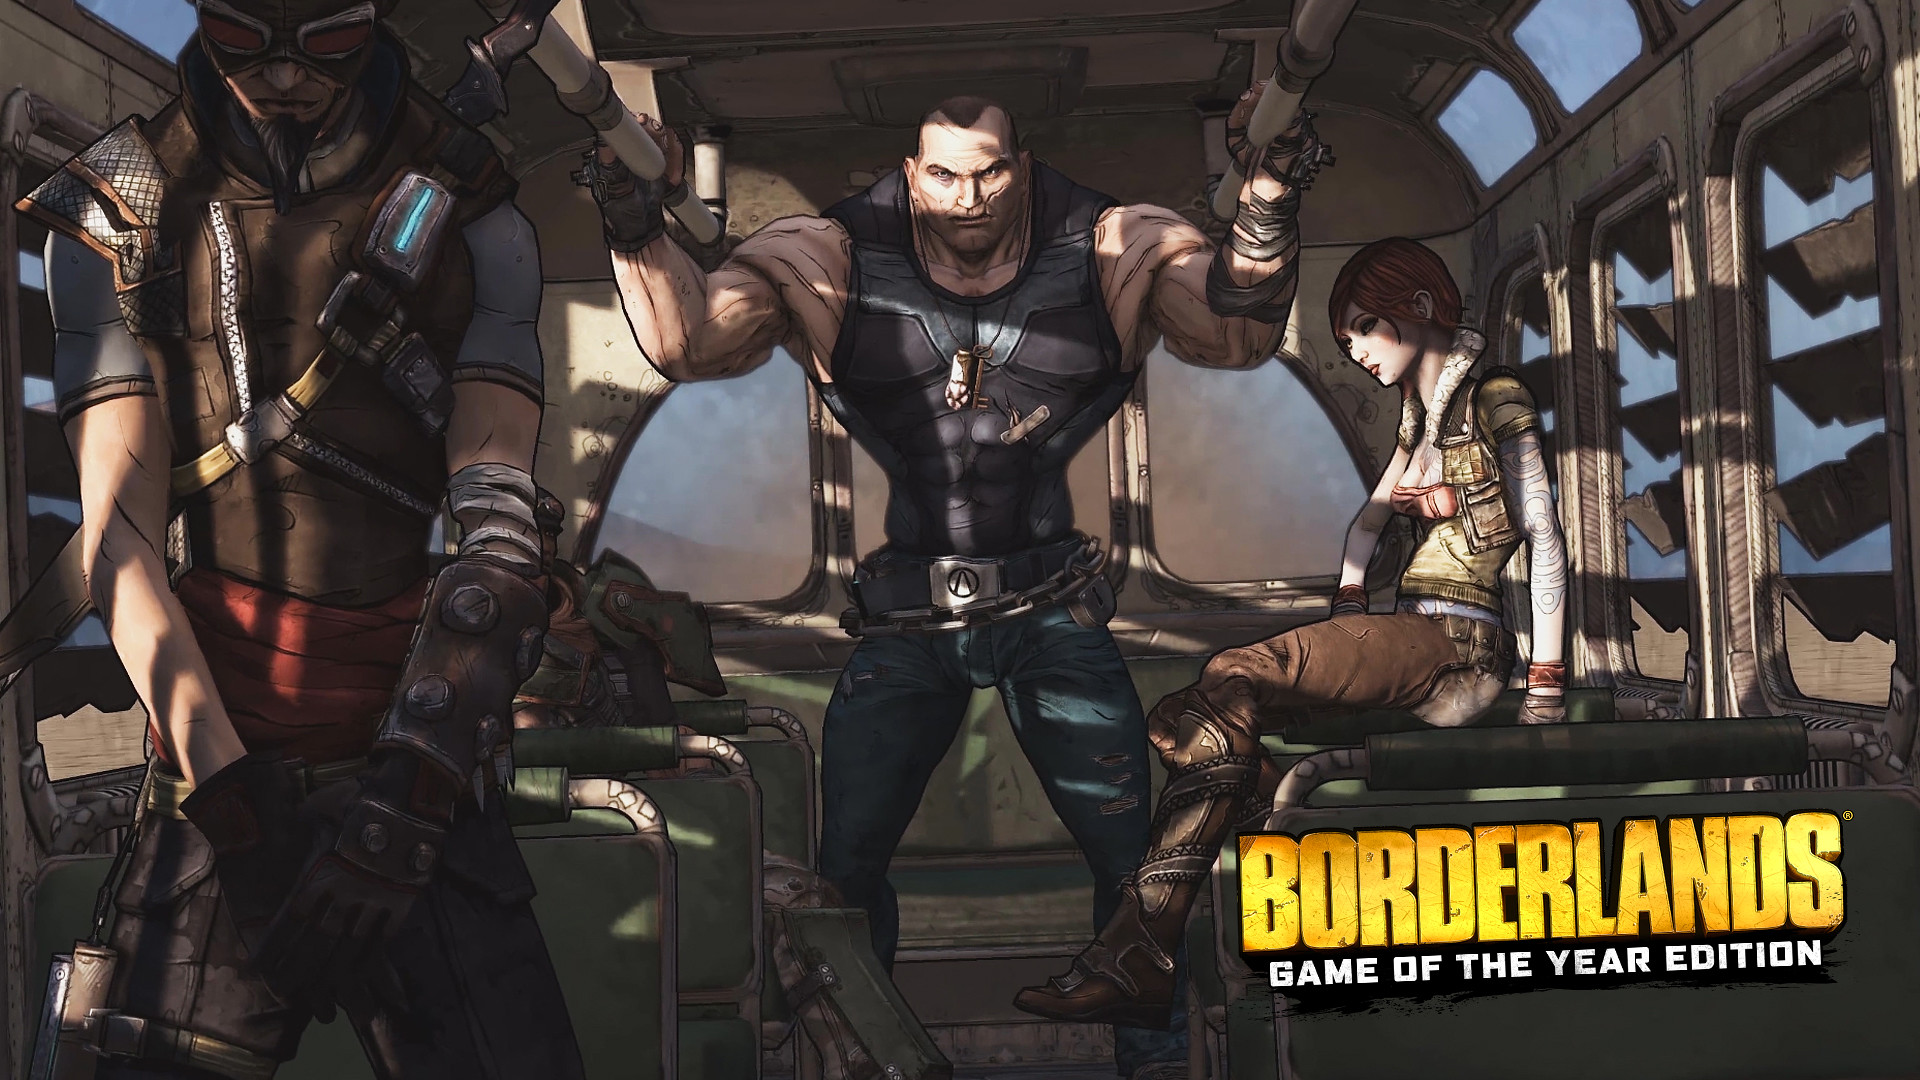 Borderlands 3 Game of the Year Poster